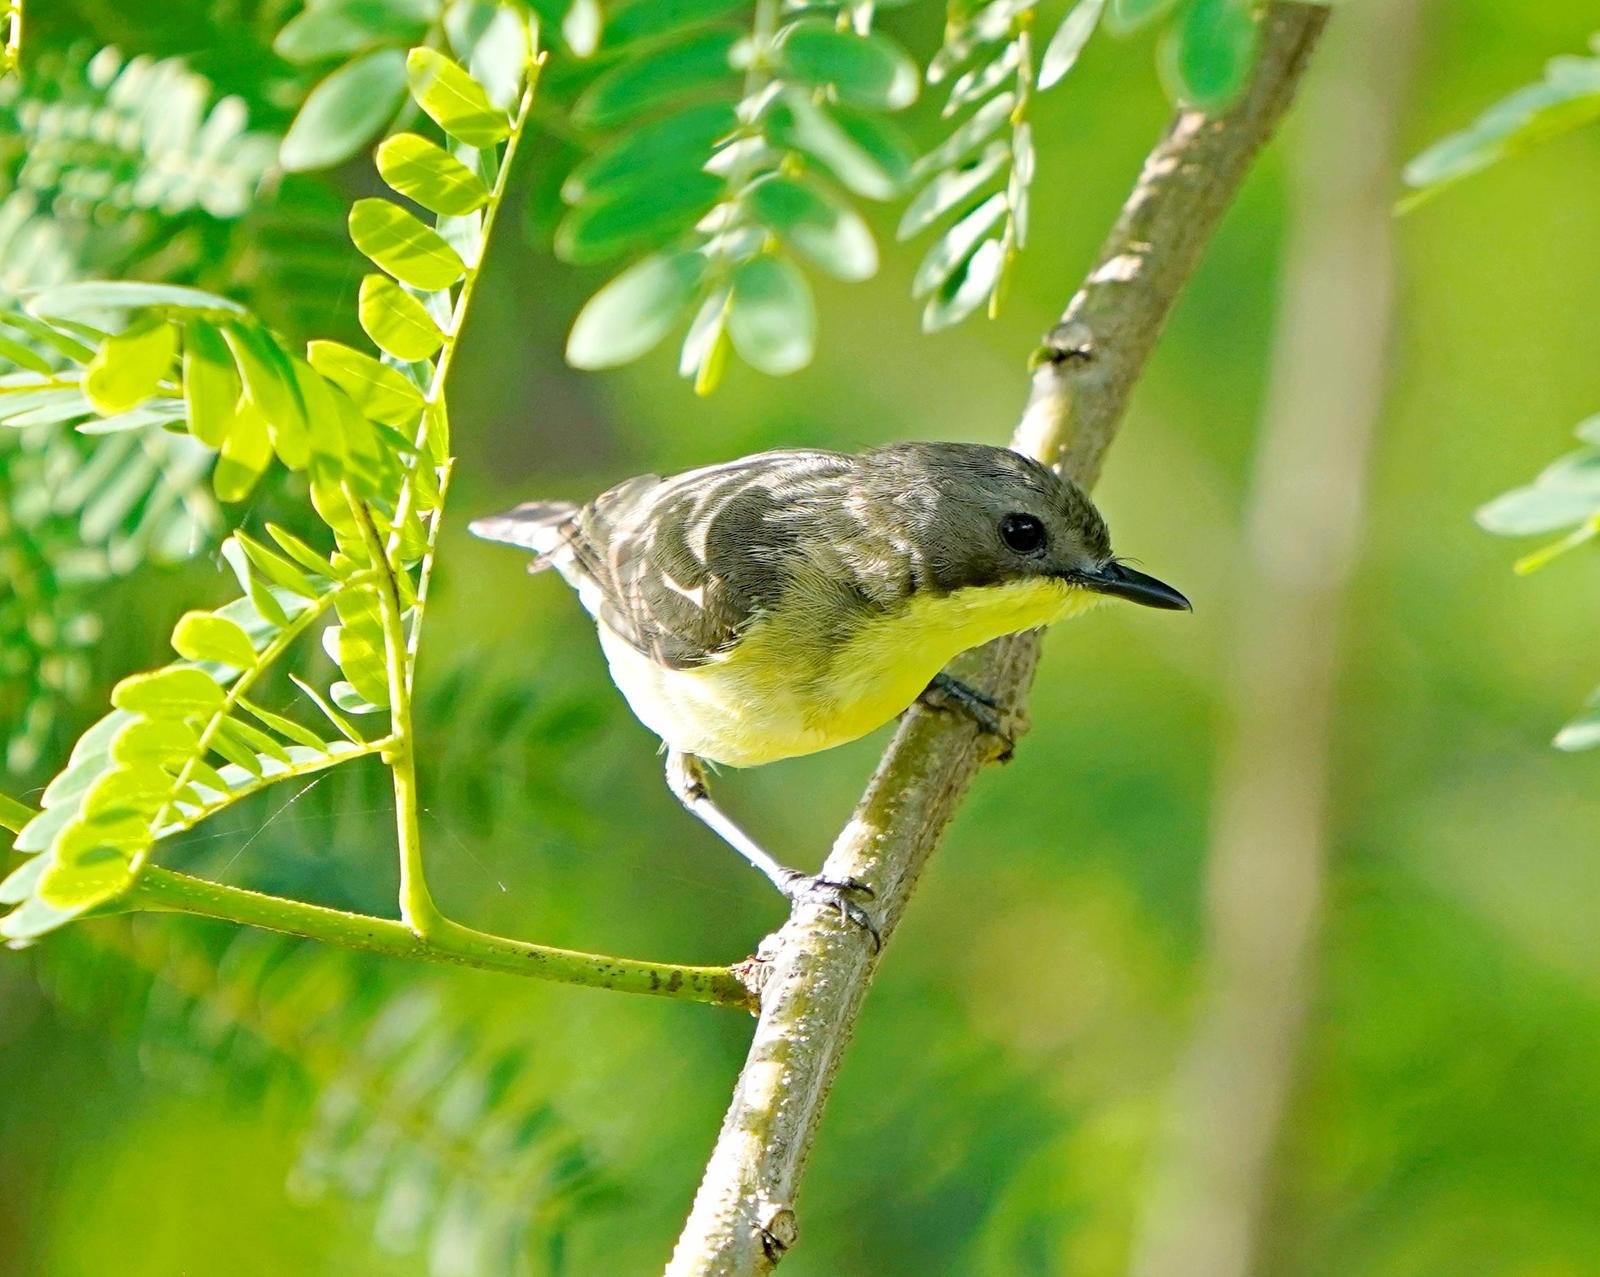 Golden-bellied Gerygone Photo by Steven Cheong